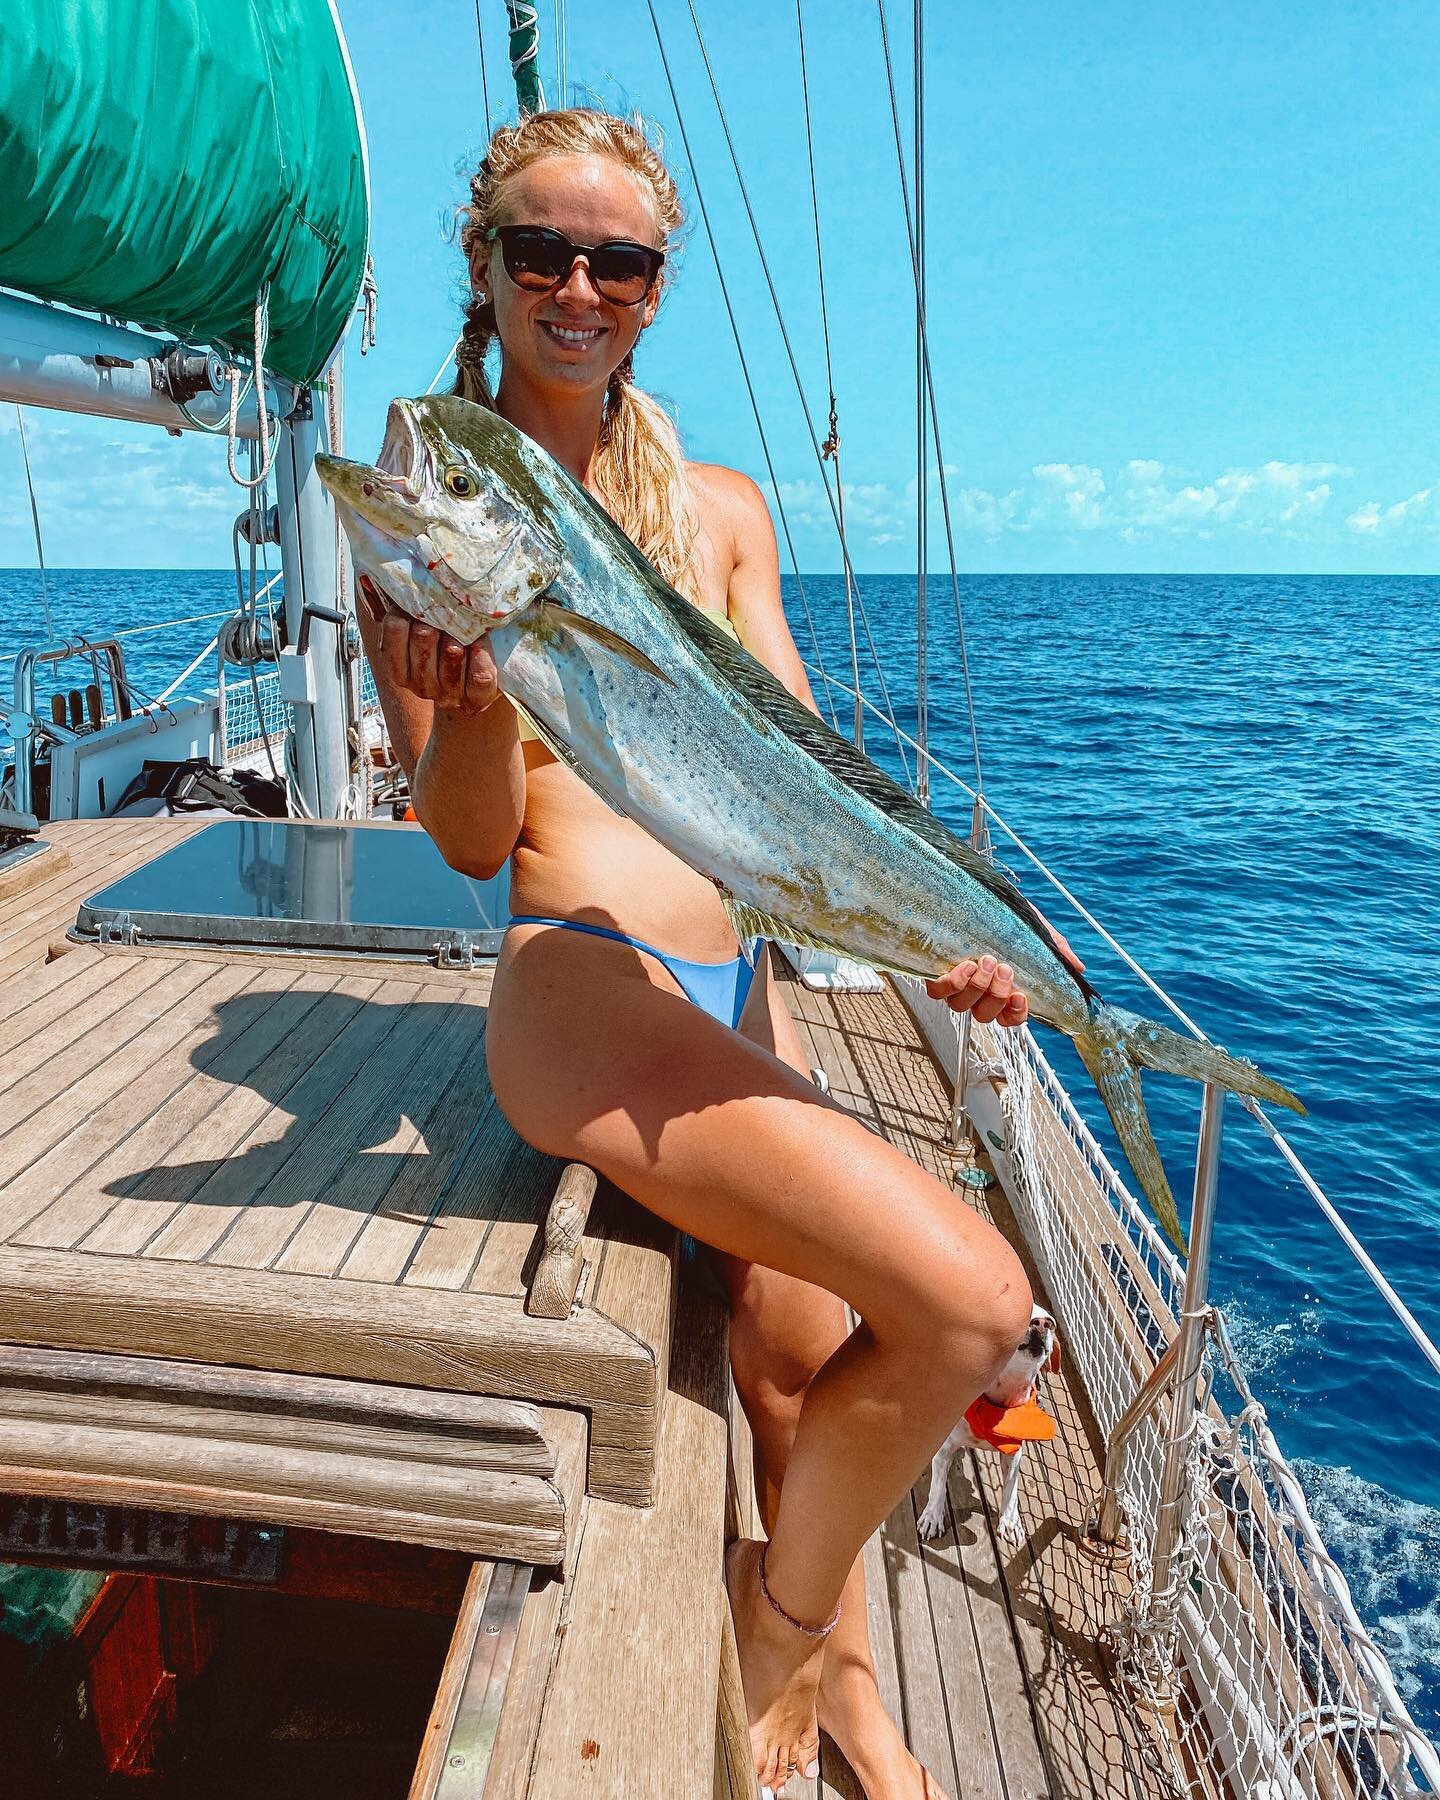 First fish on our poles! When this Mahi hit the rod you wouldn&rsquo;t believe our excitement, but the dogs excitement was a whole nother level!!
.
.
.
.
.
.
.
#reelfishing #rodfishing #mahimahi #girlswhofish #fishinggirls #fishing #fish #ocean #cari